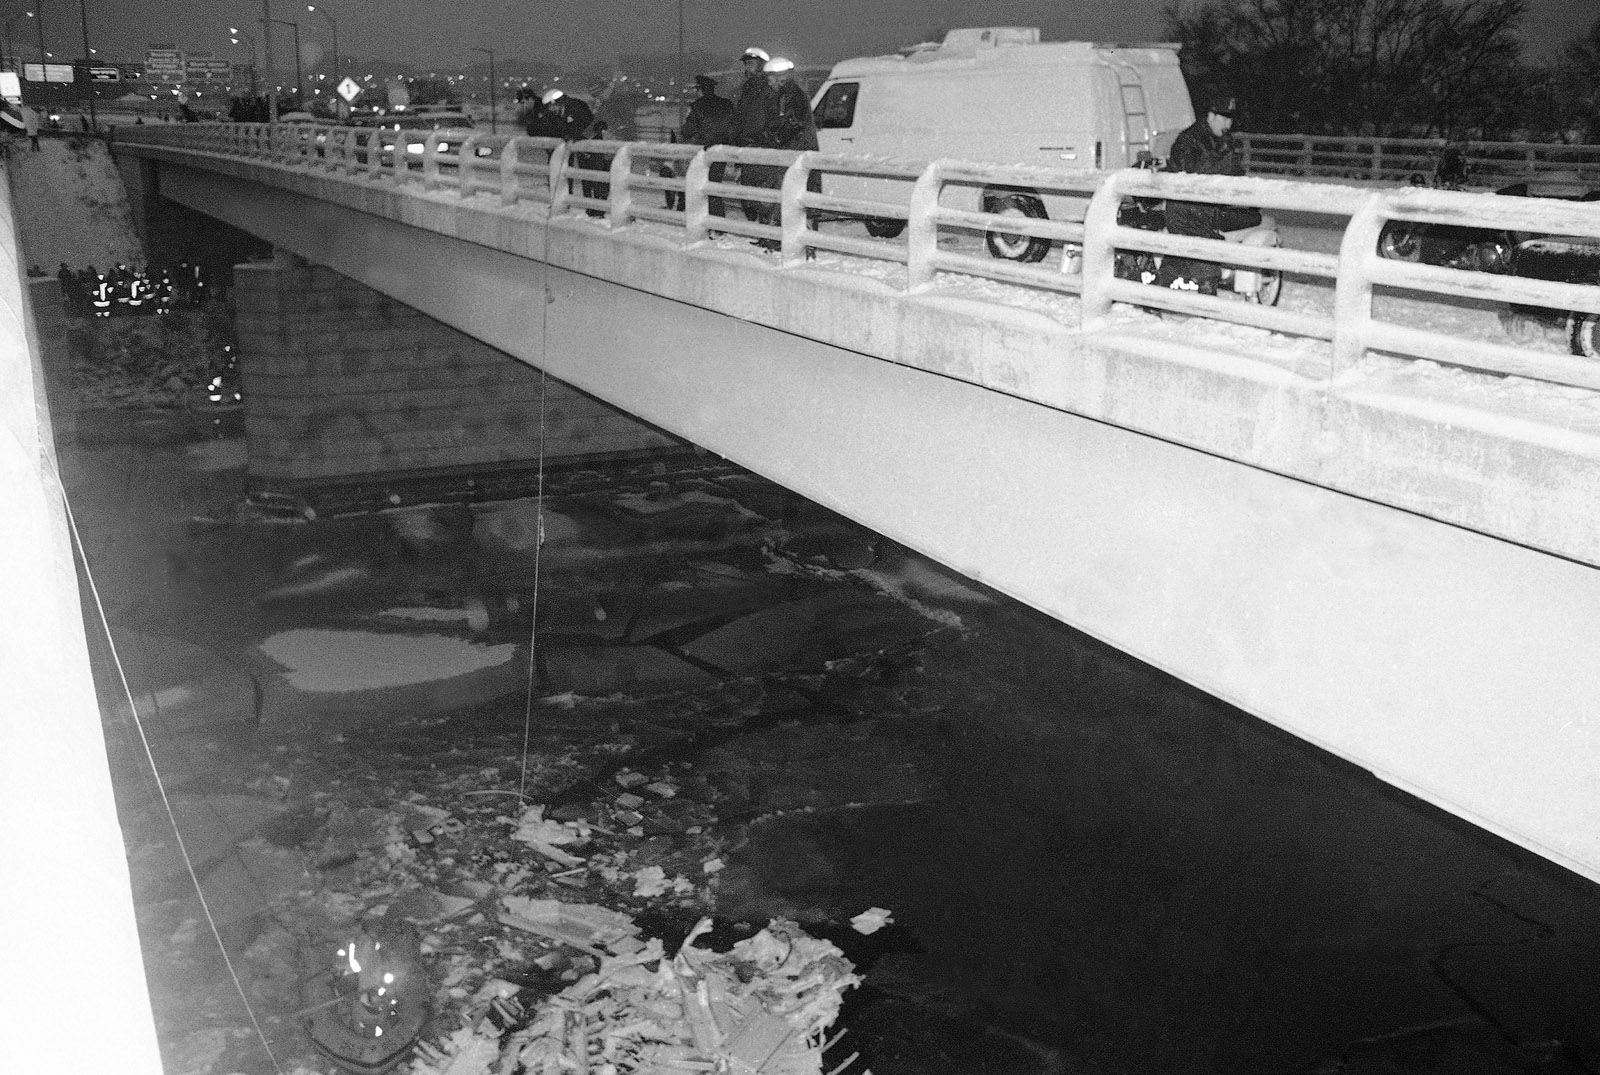 Rescue workers drop a line of the 14th Street Bridge following the crash of an Air Florida jetliner in Washington on Wednesday, Jan. 14, 1982. Hitting the bridge and several cars and trucks, the plane landed in the Potomac River. (AP Photo)